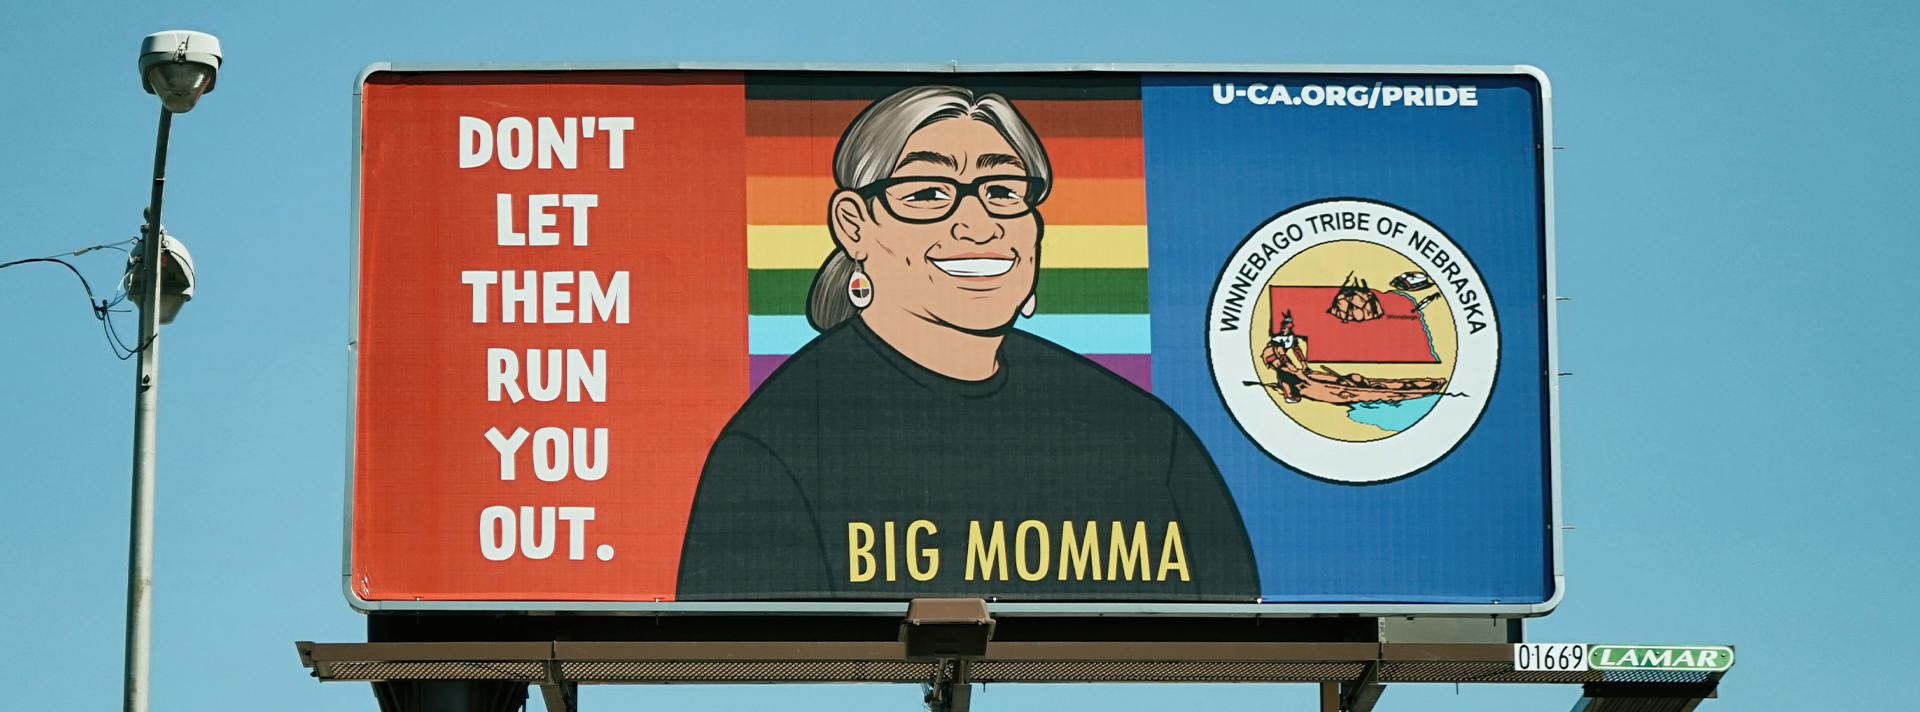 We Thrive In Middle Spaces Big Mamma Banner